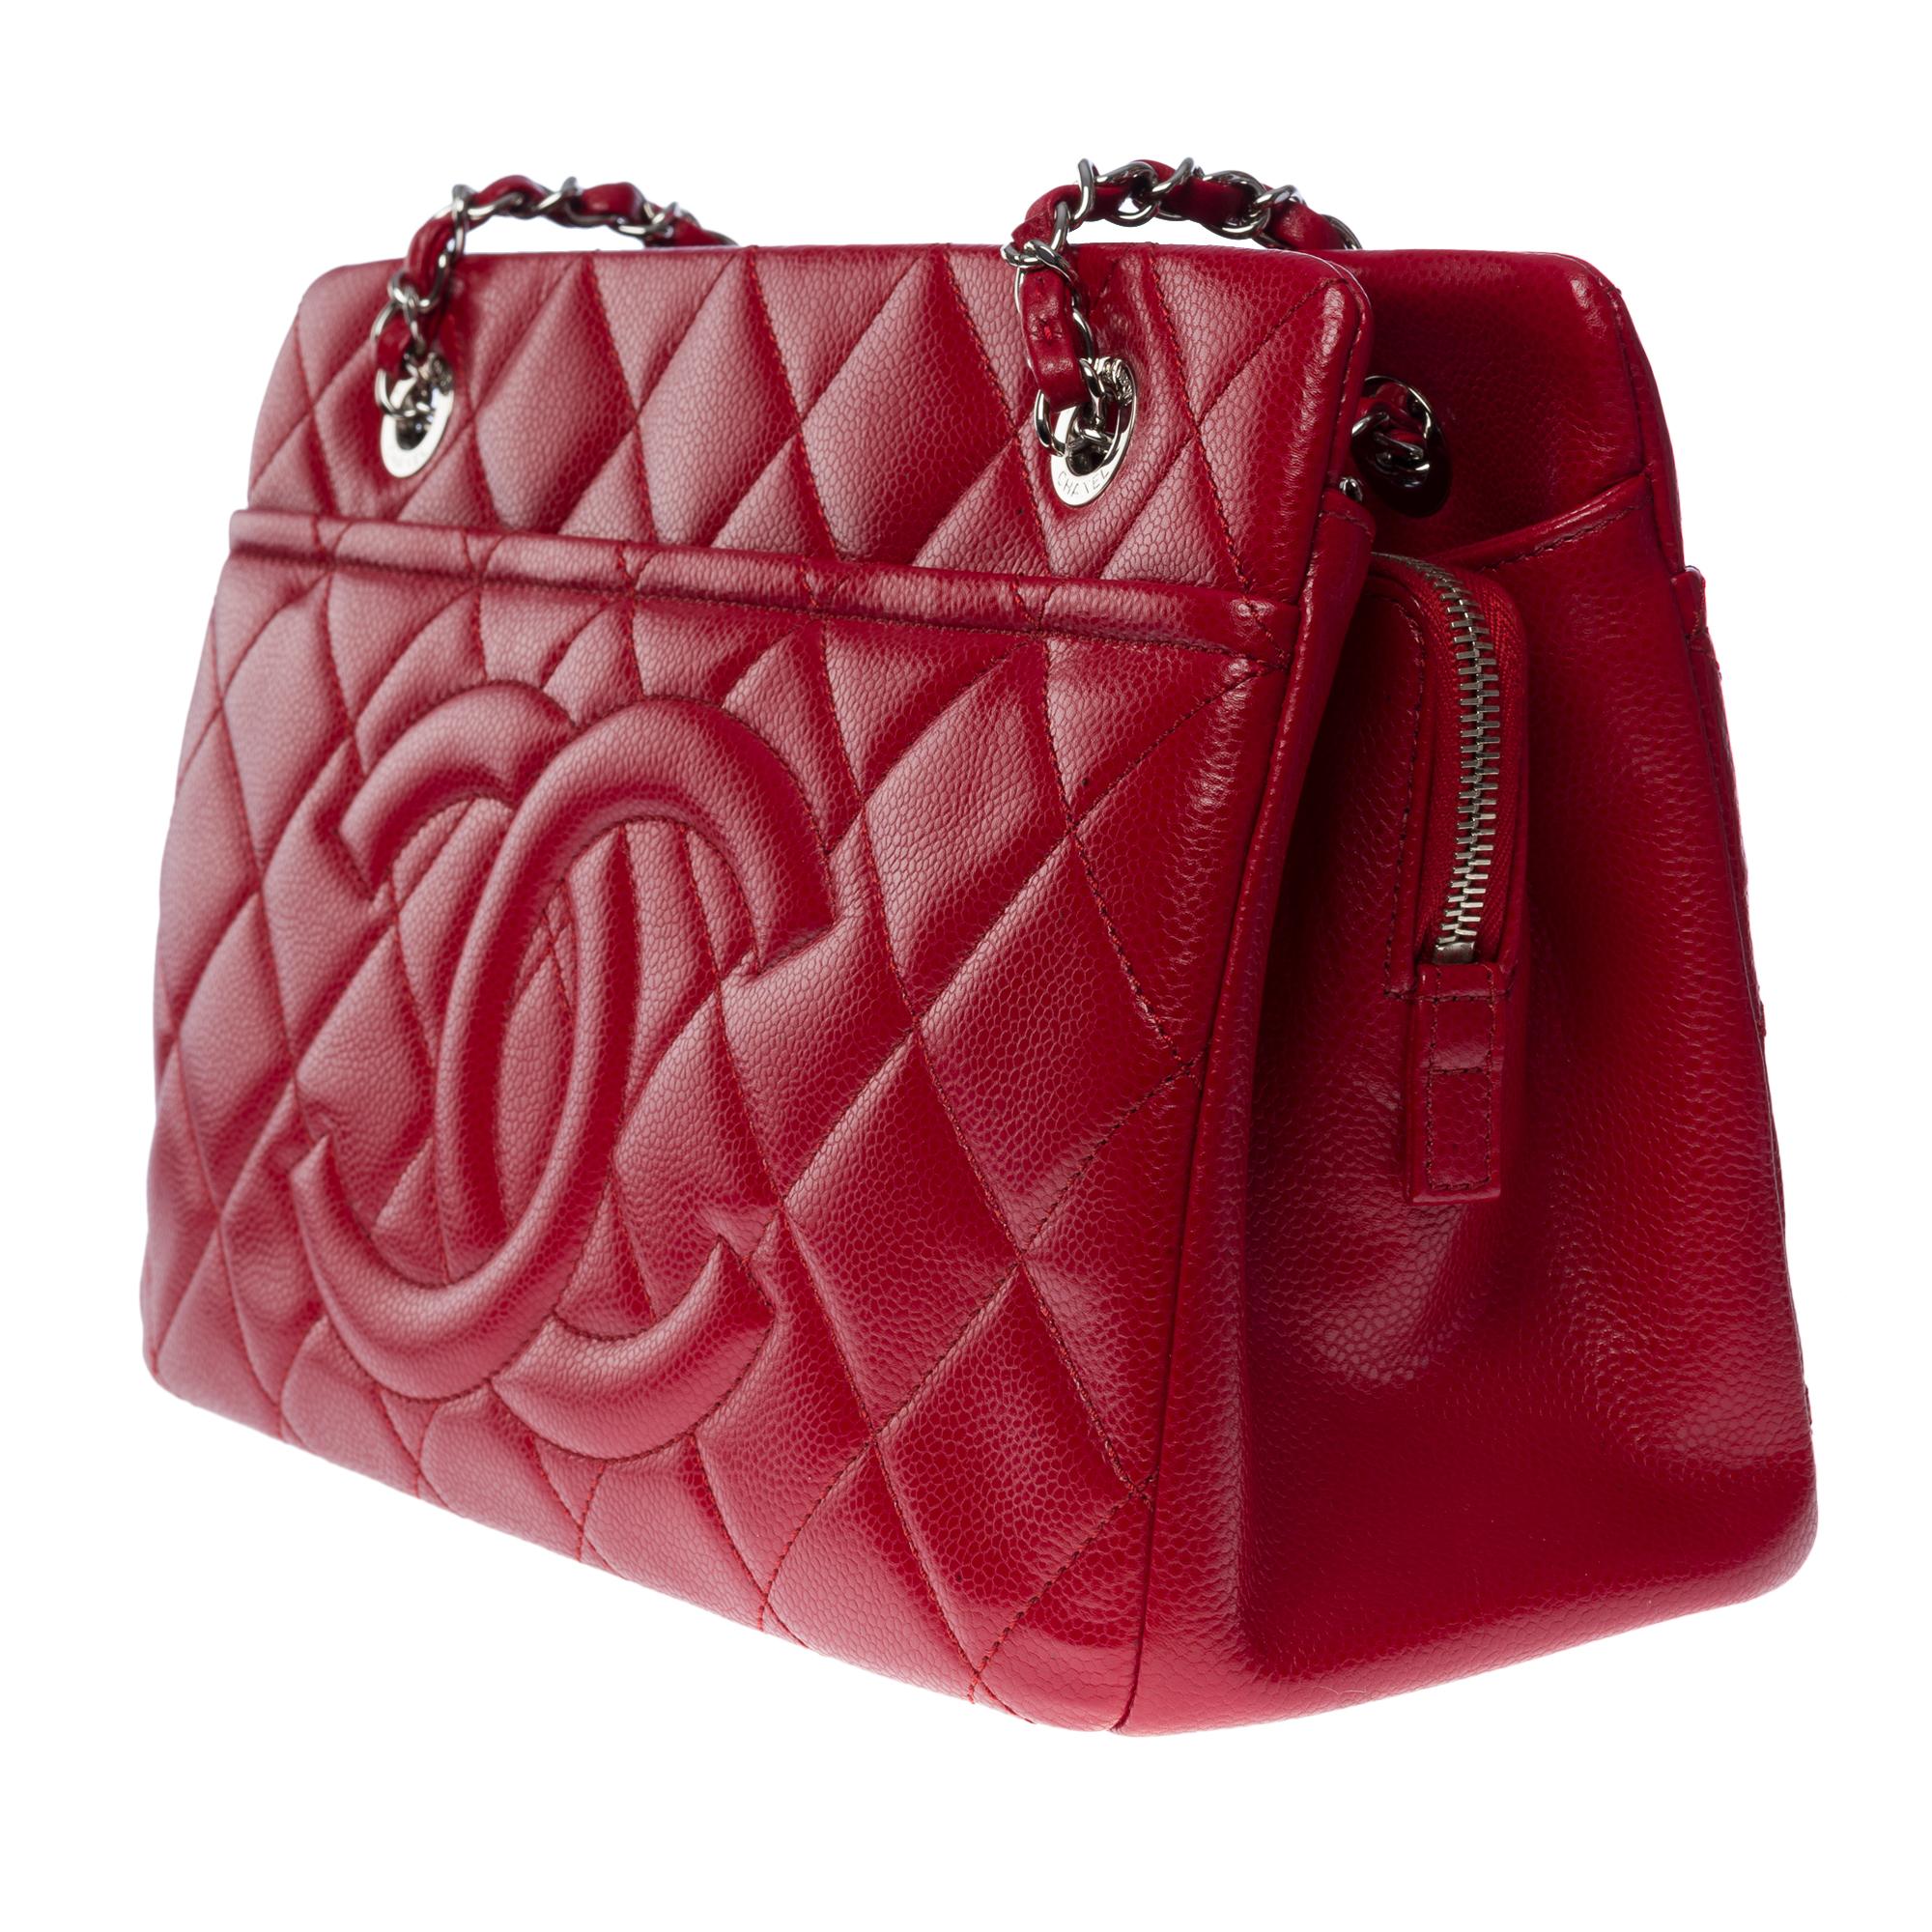 Women's Bright & Amazing Chanel Shopping Tote bag in Red Caviar quilted leather, SHW For Sale